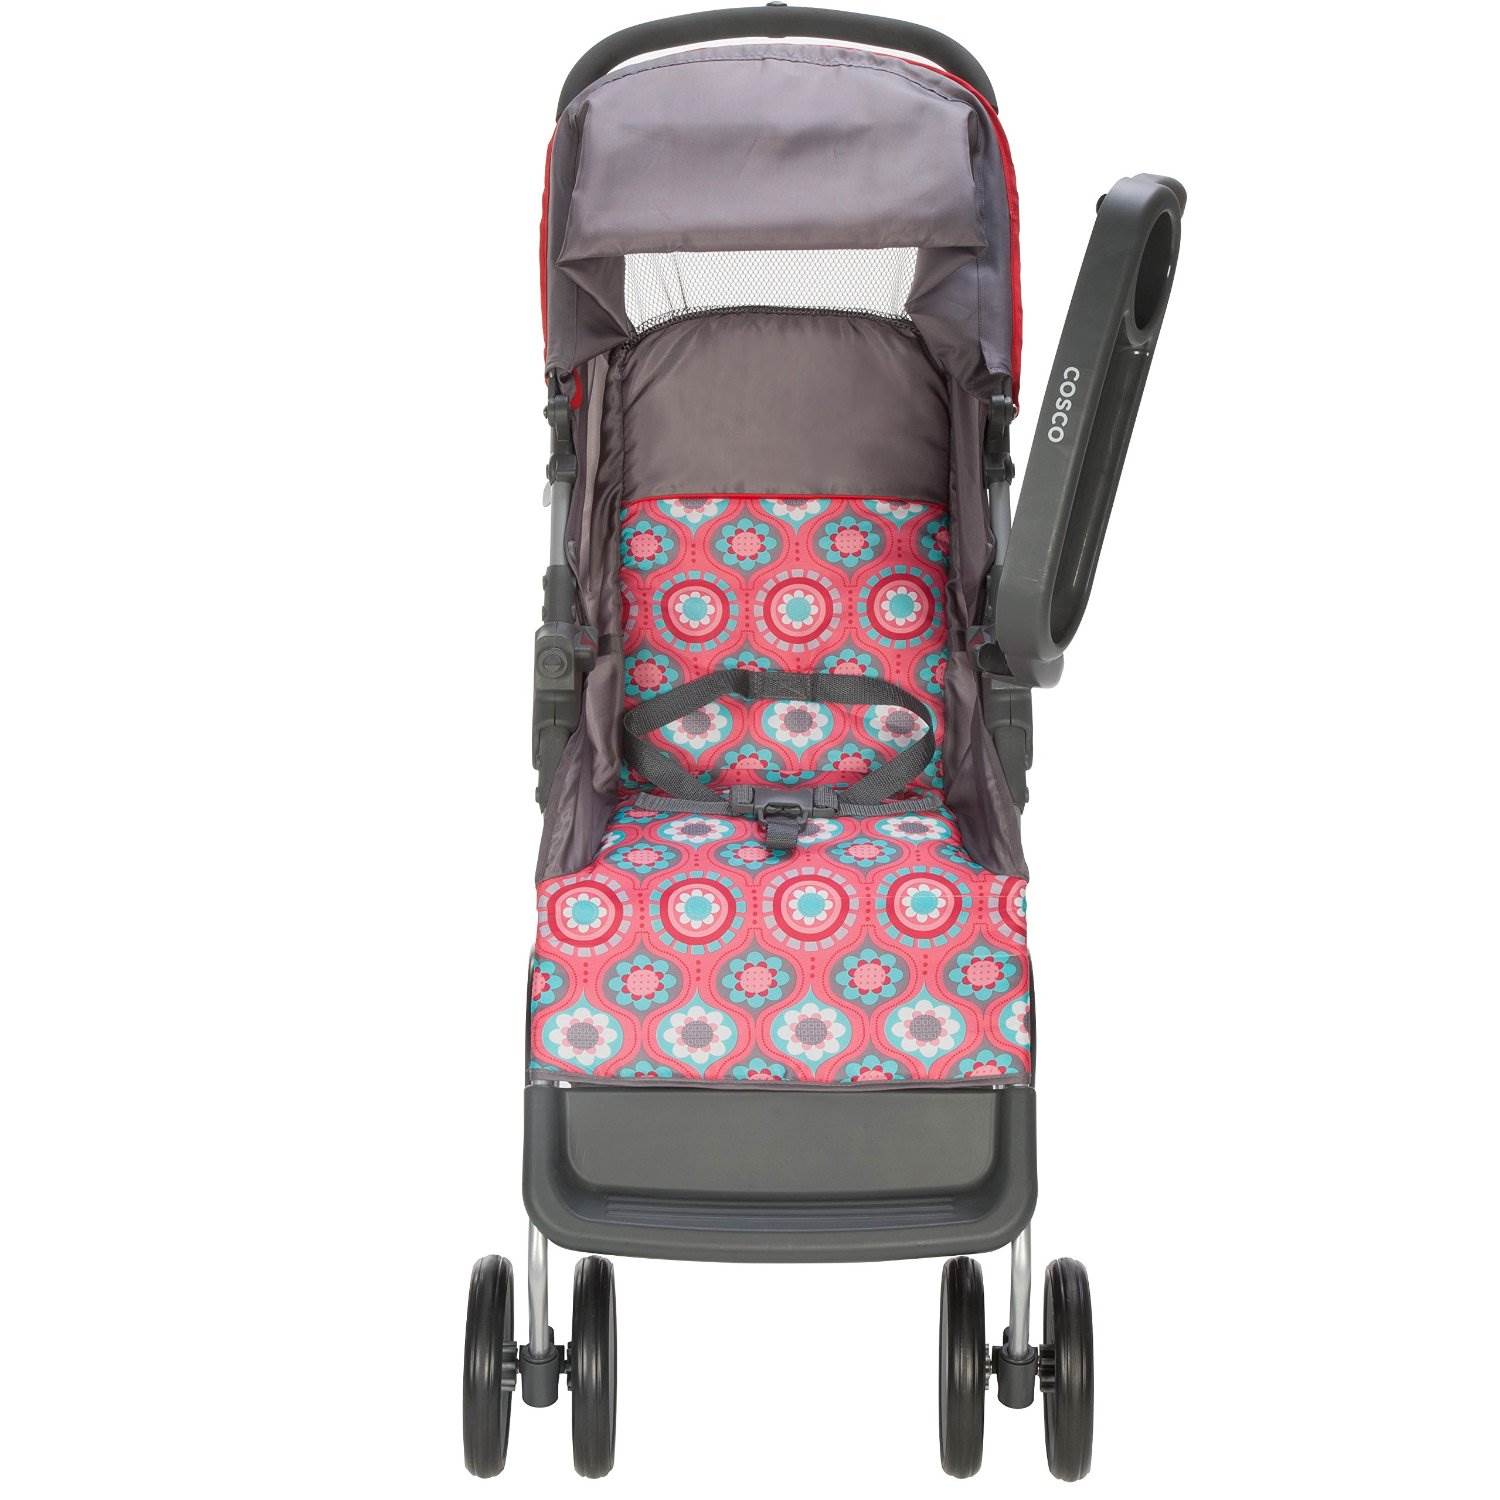 Cosco Lift &amp; Stroll Posey Pop Convenience Standard Stroller - image 2 of 8